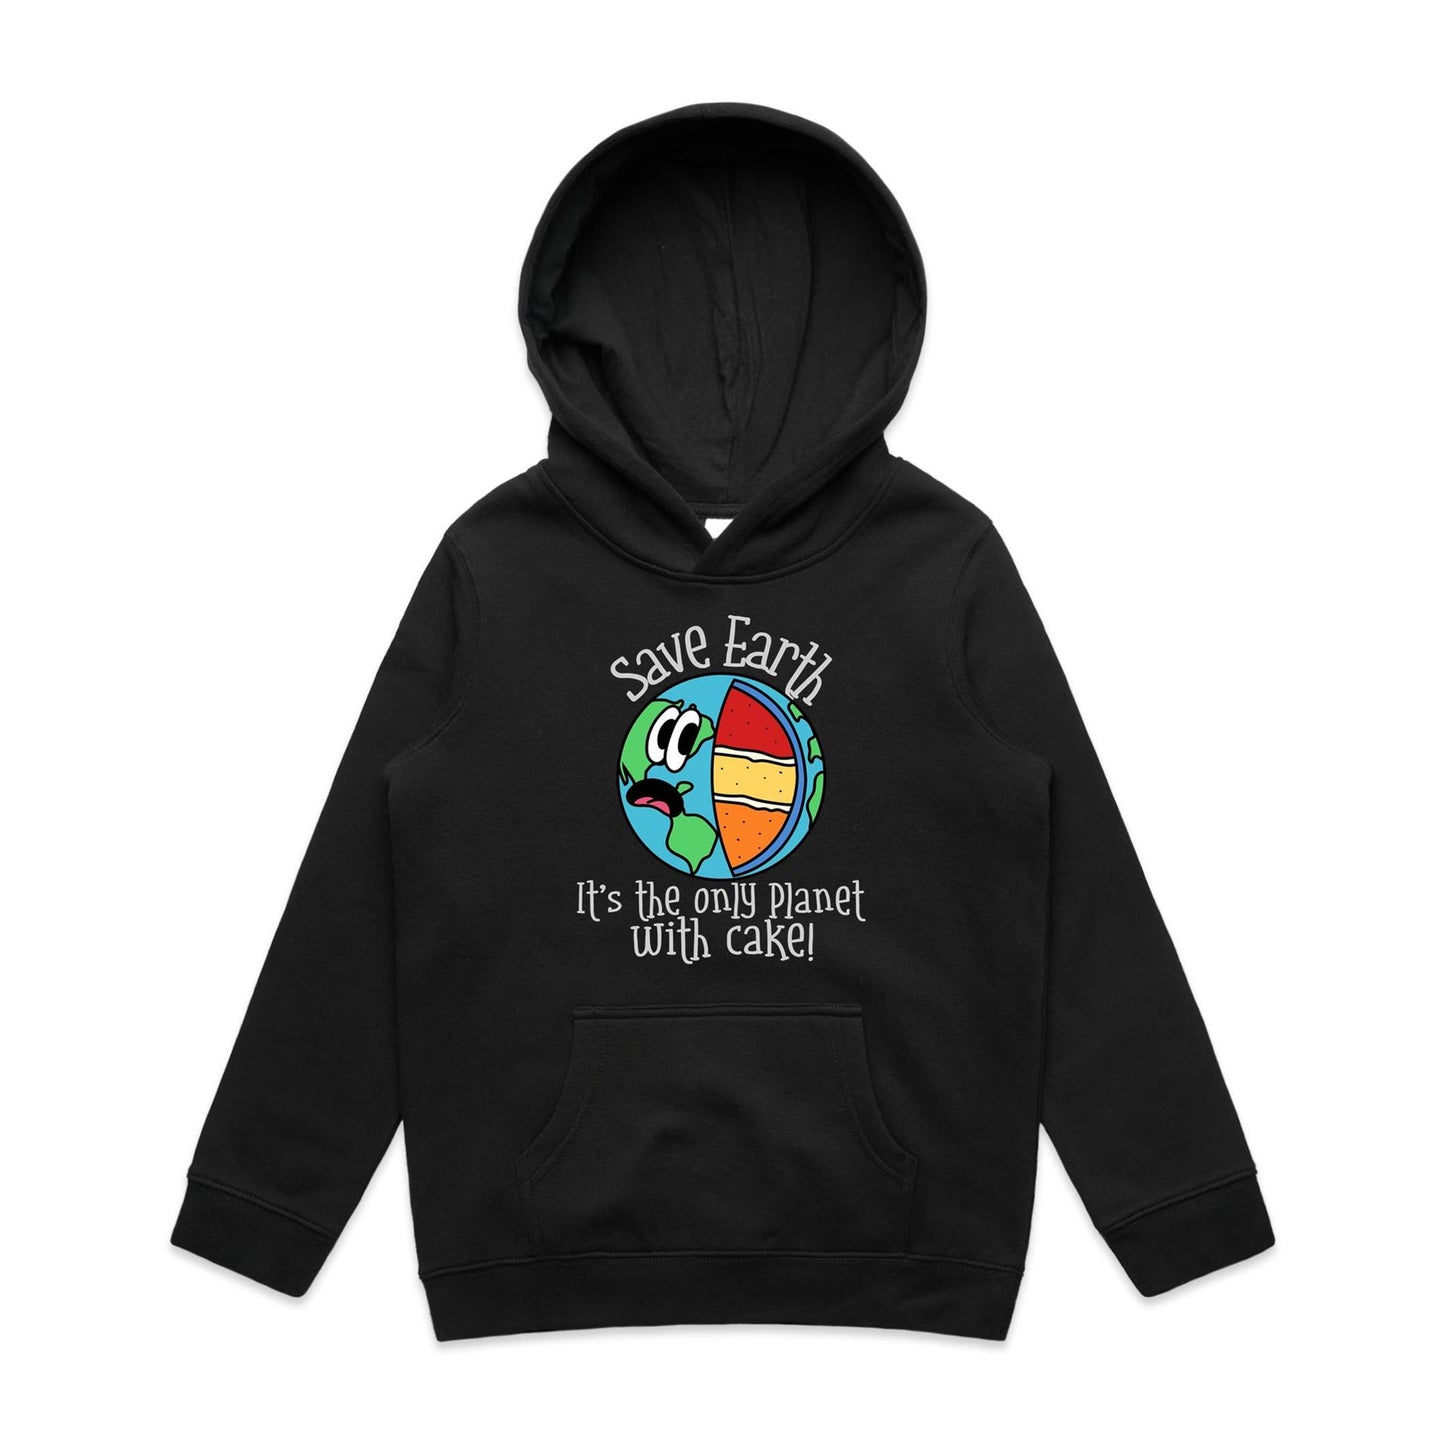 Save Earth, It's The Only Planet With Cake - Youth Supply Hood Black Kids Hoodie